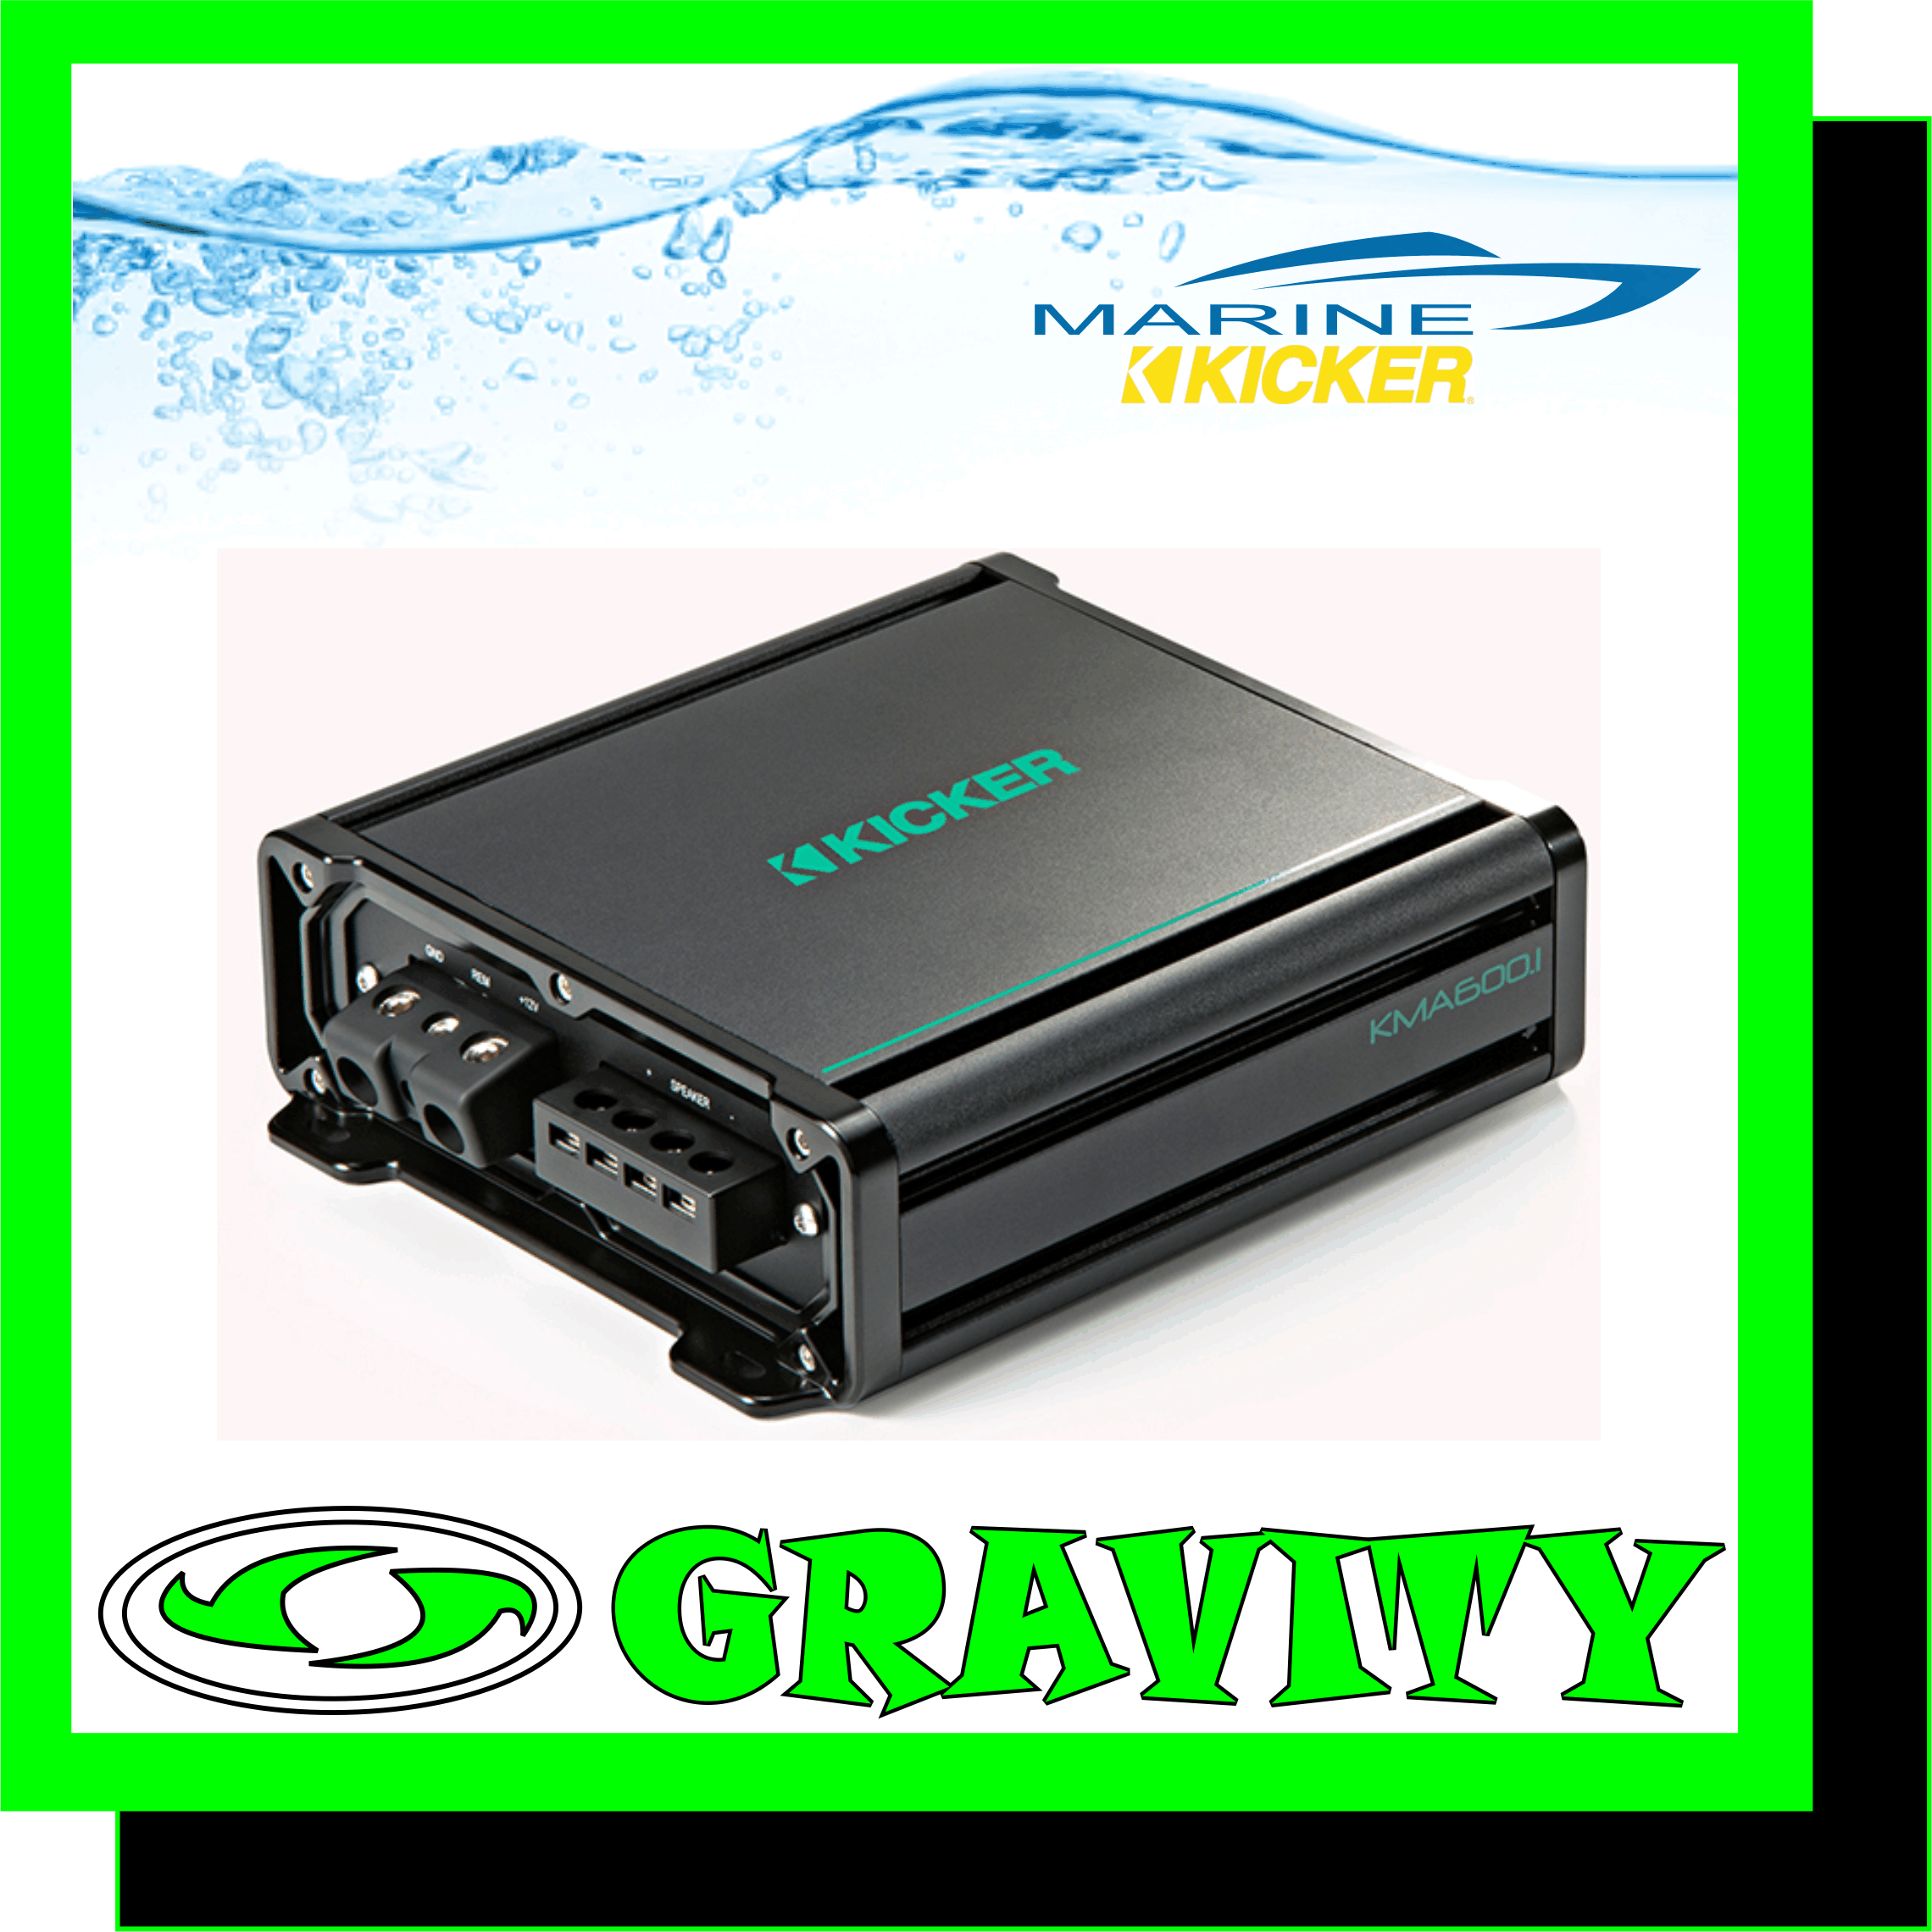 Kicker 45KMA6001 Monoblock 600Watt @ 2 Ohm Marine Class-D Amplifier  BIG BUMP  Experience the perfect way to get bass on your boat! A mighty Class-D power plant, 12dB crossover and subsonic filter all help you dial in the best sound. Use the remote level control to adjust the bass right from the dash and connect the full-range RCA outputs to expand your system!  Class-D Power Supply Mono Amplifier Conformal-Coated Circuit Board Remote Level Control Included Variable 12dB Crossover KickEQ? Variable 12dB Bass Boost 24dB Subsonic Filter Full-Range RCA Output ABYC/NMMA-Compliant Power Connections 316L Stainless-Steel Hardware Included Specifications:  KMA600.1 Monoblock 600Watt @ 2 Ohm Marine Class-D Amplifier:  POWER [watts/ch], CLASS D 2 OHM MONO: 600 x 1 Class-D Power Supply Mono Amplifier Conformal-Coated Circuit Board Remote Level Control Included Variable 12dB Crossover KickEQ? Variable 12dB Bass Boost 24dB Subsonic Filter Full-Range RCA Output ABYC/NMMA-Compliant Power Connections 316L Stainless-Steel Hardware Included What?s in the Box: 1 ? mono power amplifier 1 ? remote control 1 ? remote cable 1 ? user manual, mounting hardware   KMA600.1 Monoblock 600Watt @ 2 Ohm Marine Class-D Amplifier Big bass meets big value. Use this flexible KM marine subwoofer amplifier to power your bass with ease, and pump up the sound like only KICKER can! Experience the perfect way to get bass on your boat! A mighty Class-D power plant, 12dB crossover and subsonic filter all help you dial in the best sound. Use the remote level control to adjust the bass right from the dash and connect the full-range RCA outputs to expand your system!  